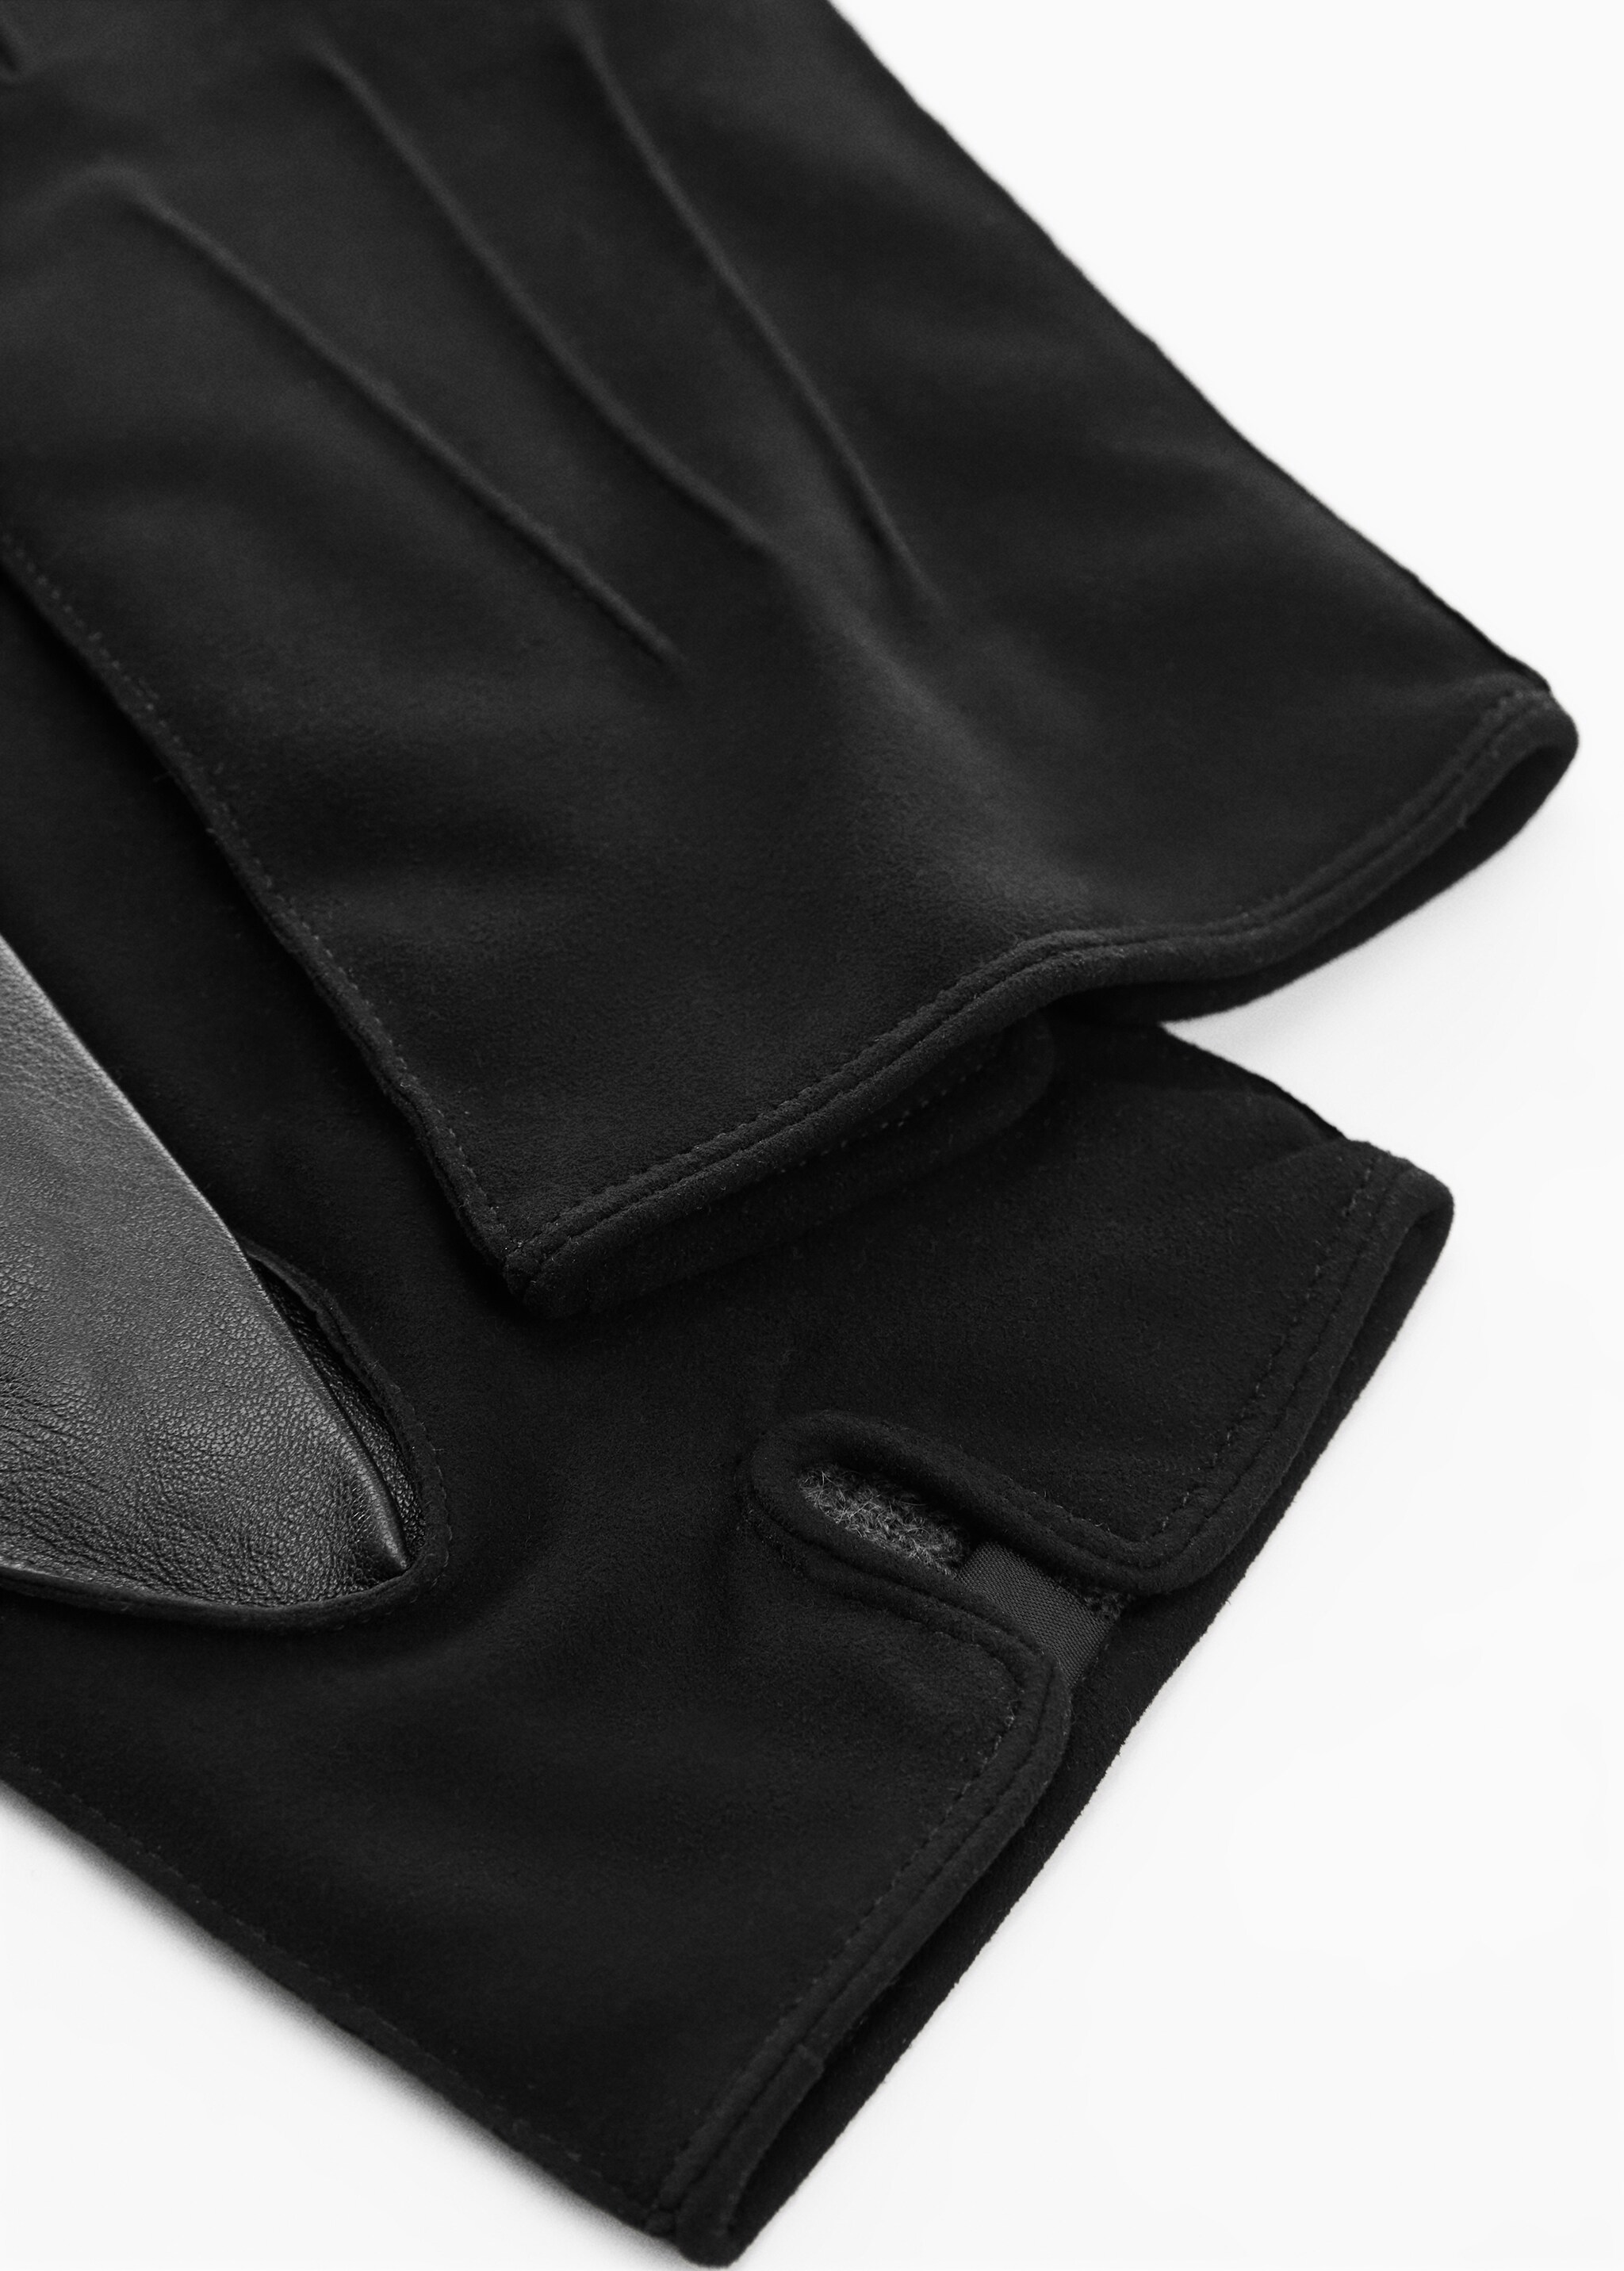 Suede leather gloves with wool lining - Medium plane